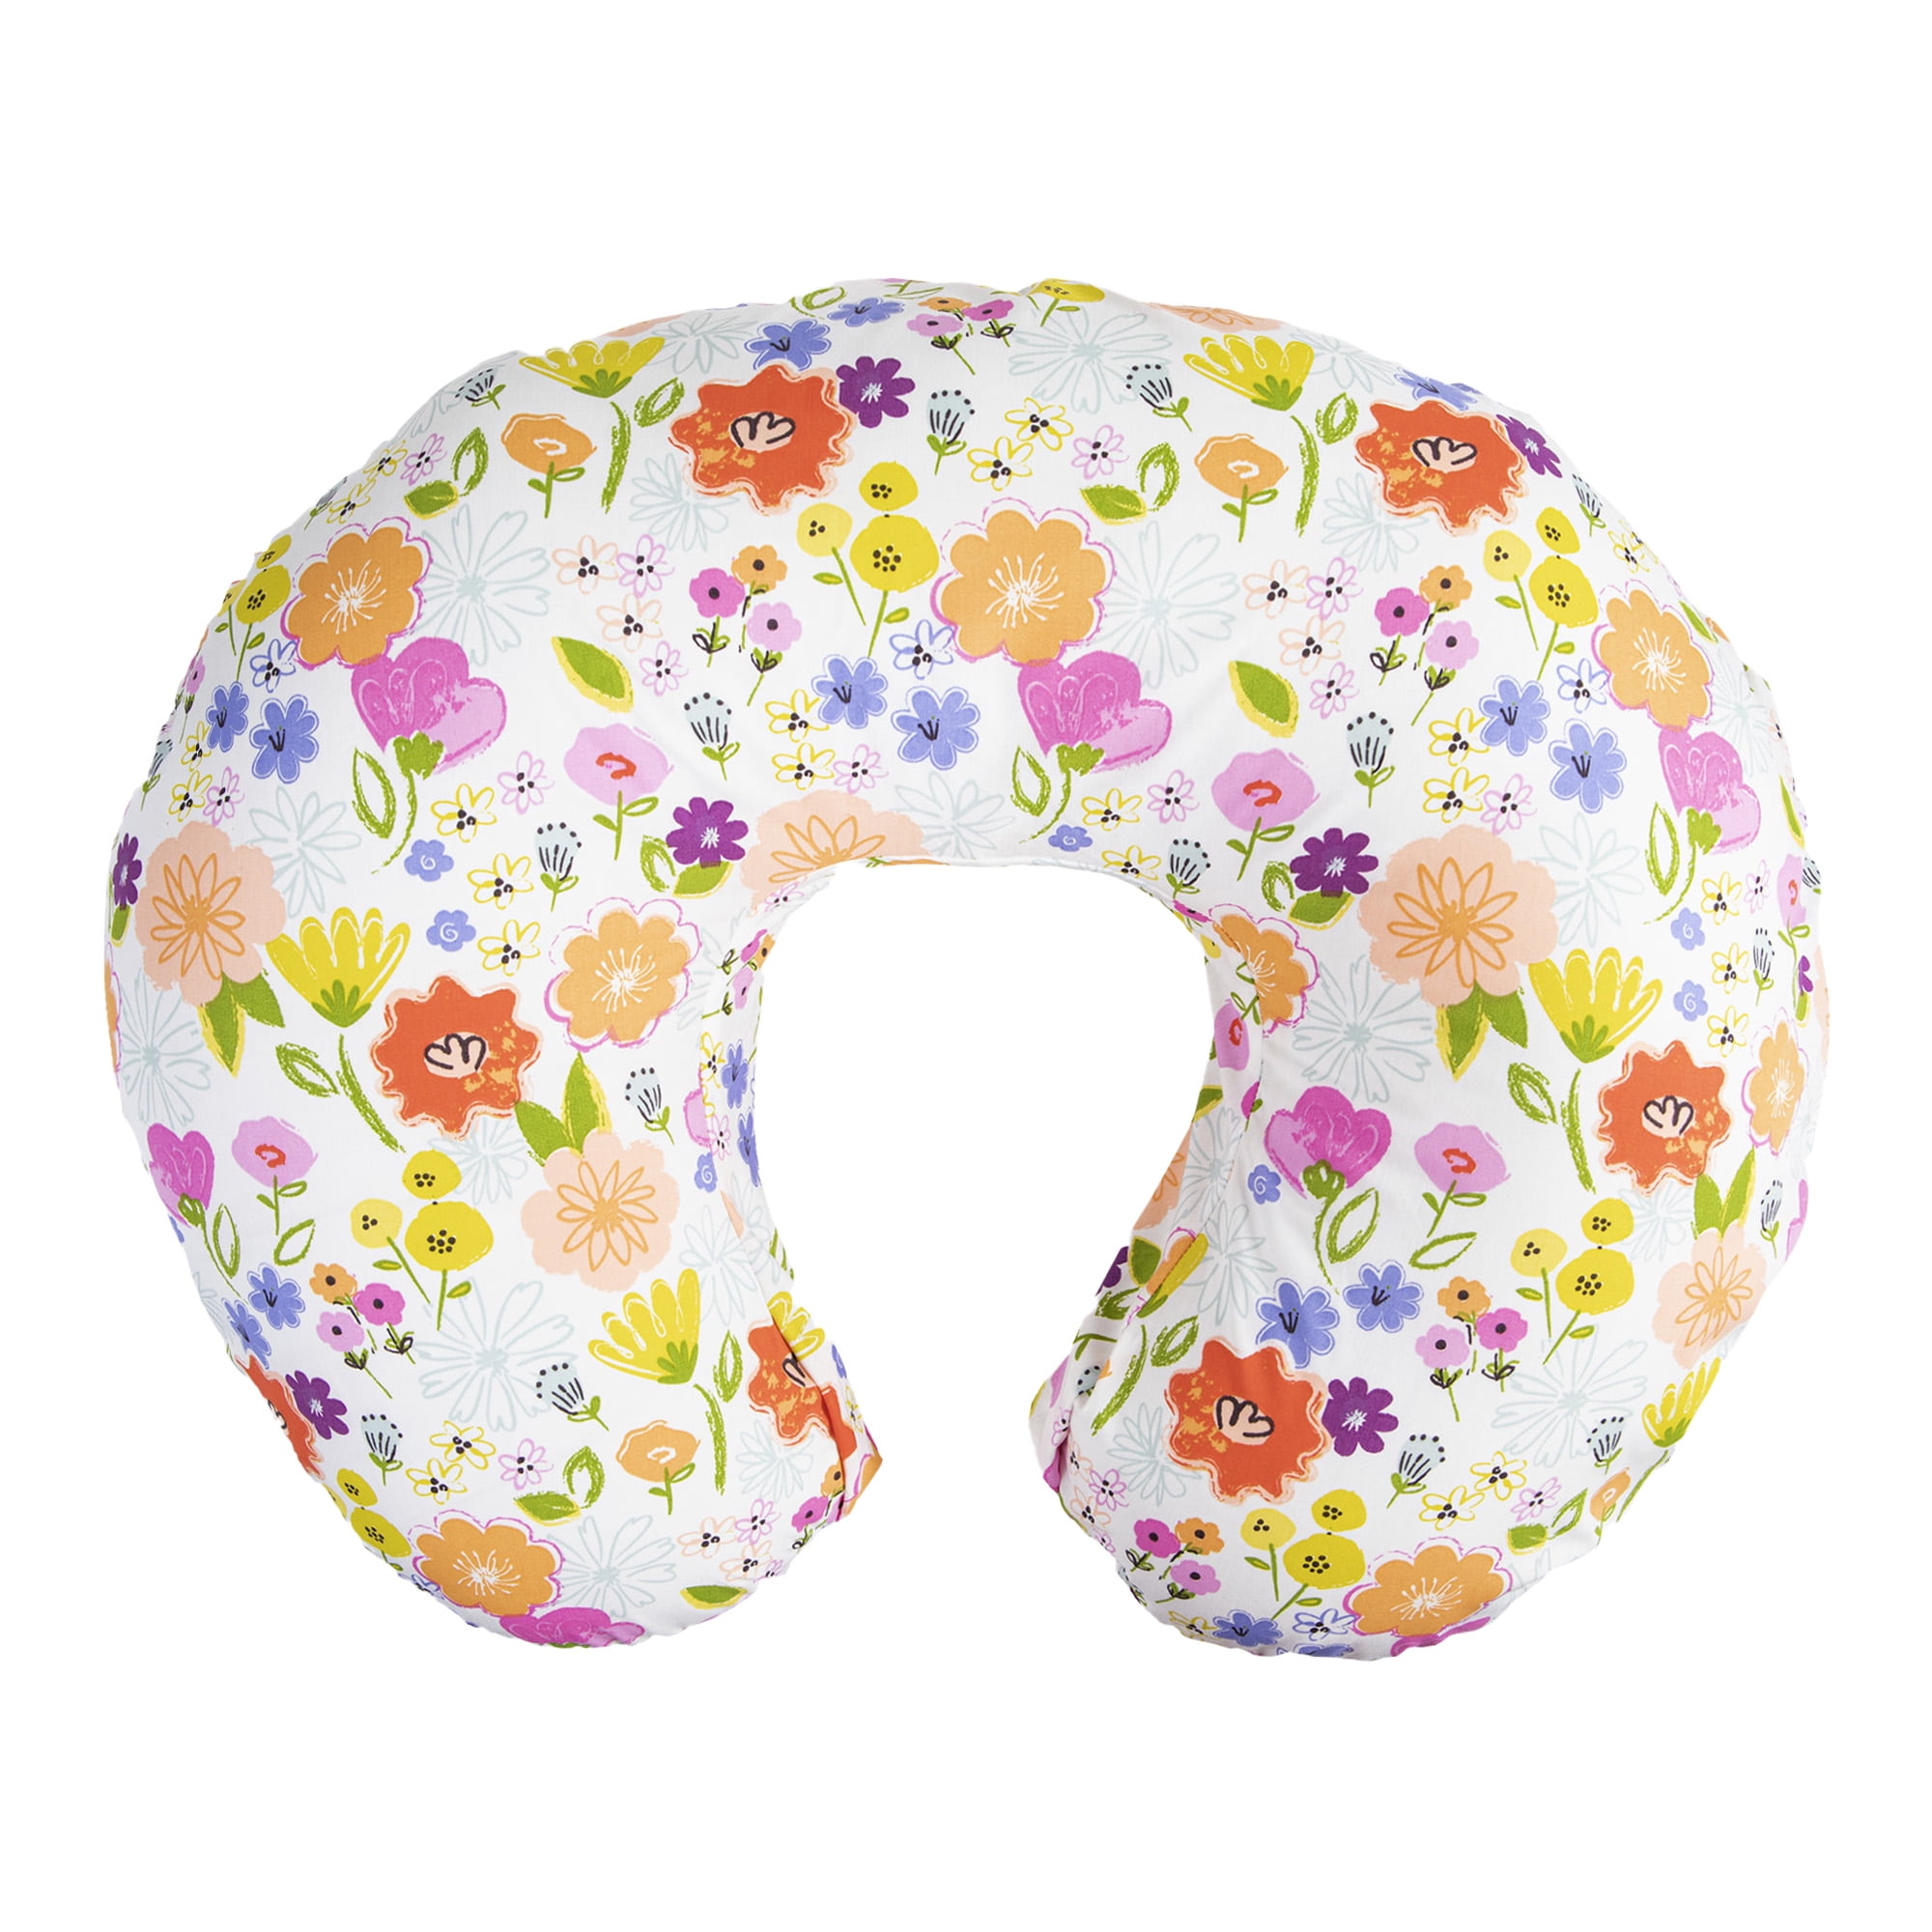 Boppy Original Nursing Pillow Cover Cotton Blend Fabric with Allover Fashion Multicolor Spice Woodland Animals